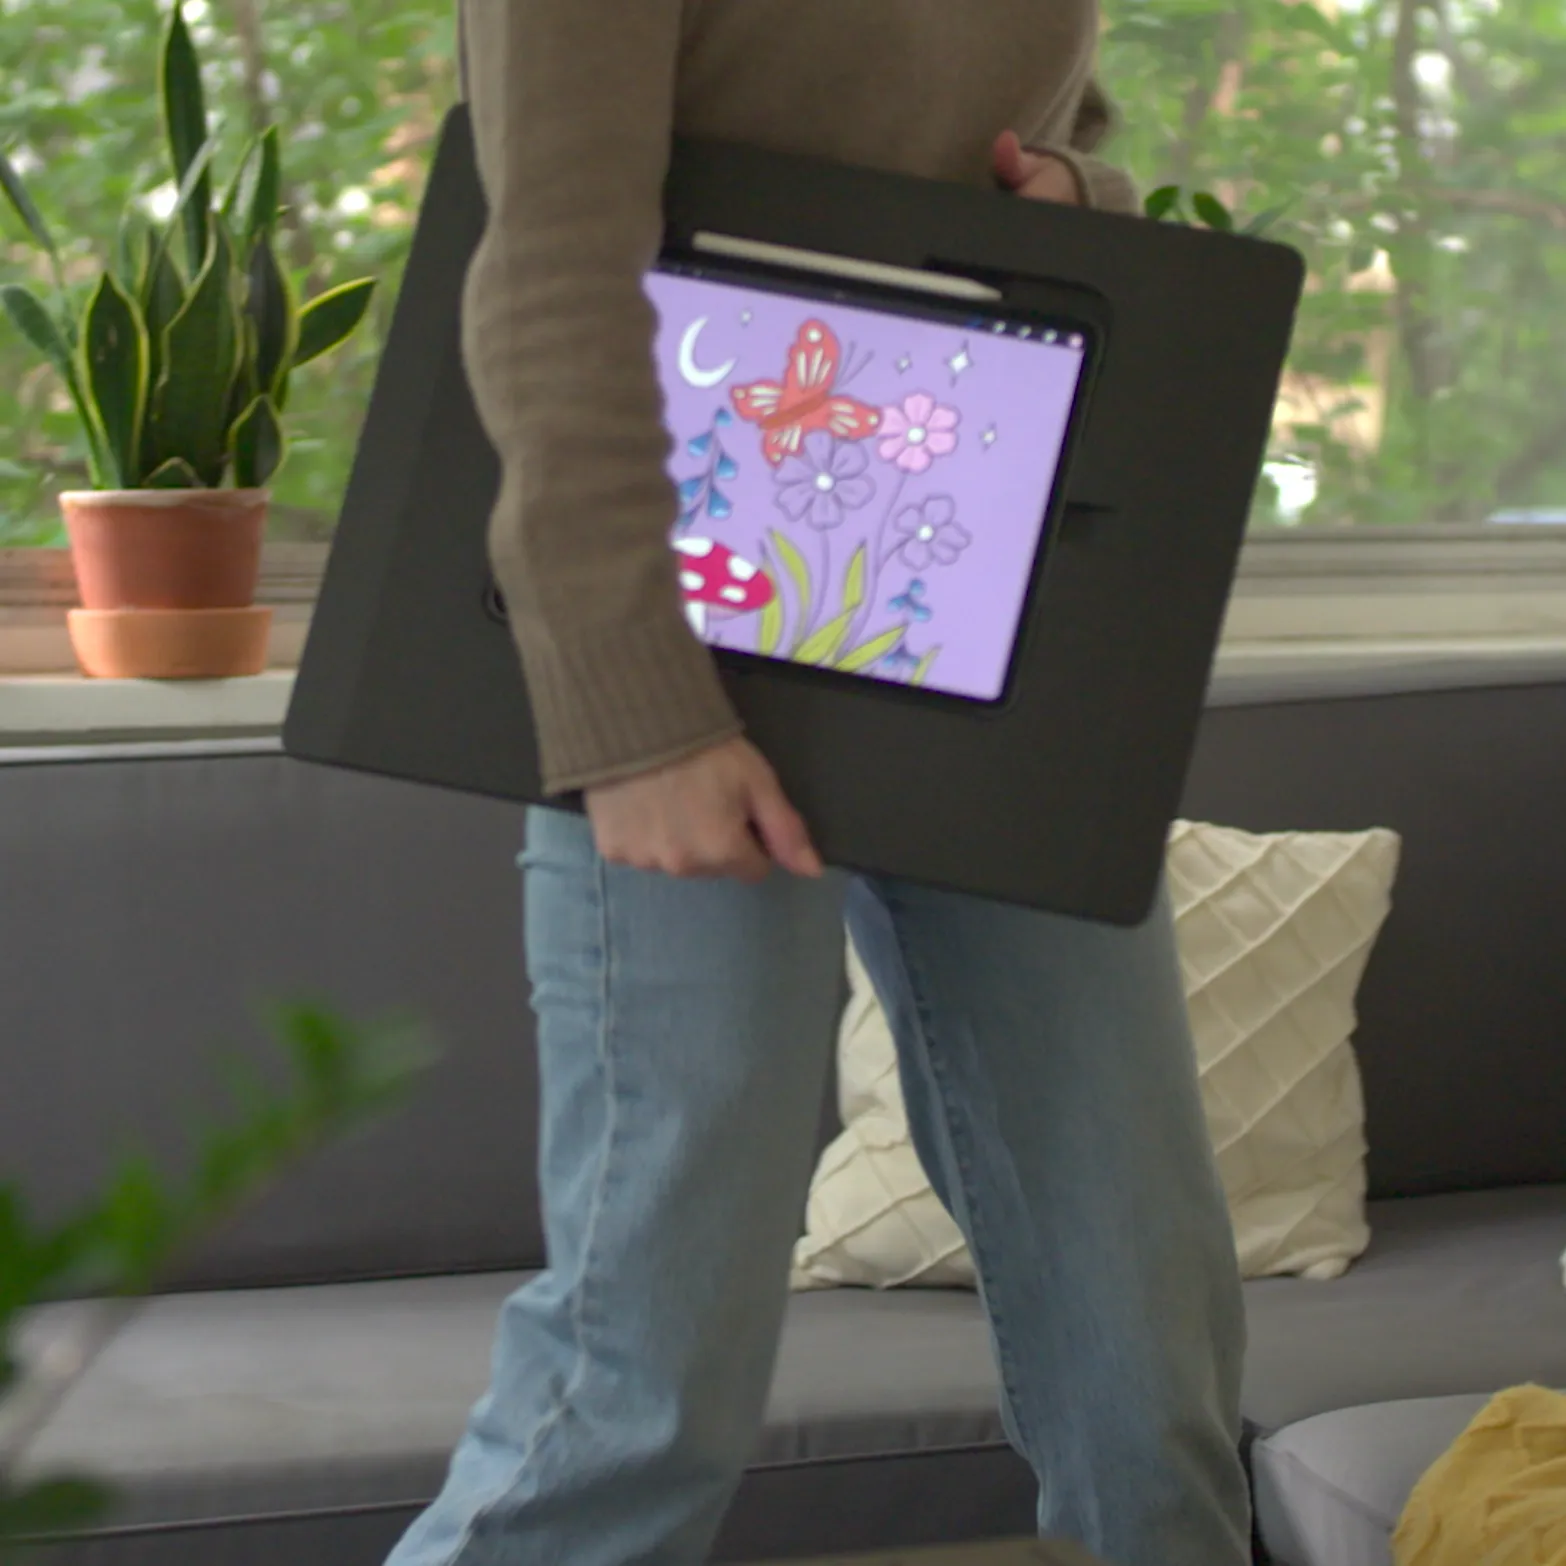 A woman walking with Darkboard at her side as the iPad displays an illustration of flowers